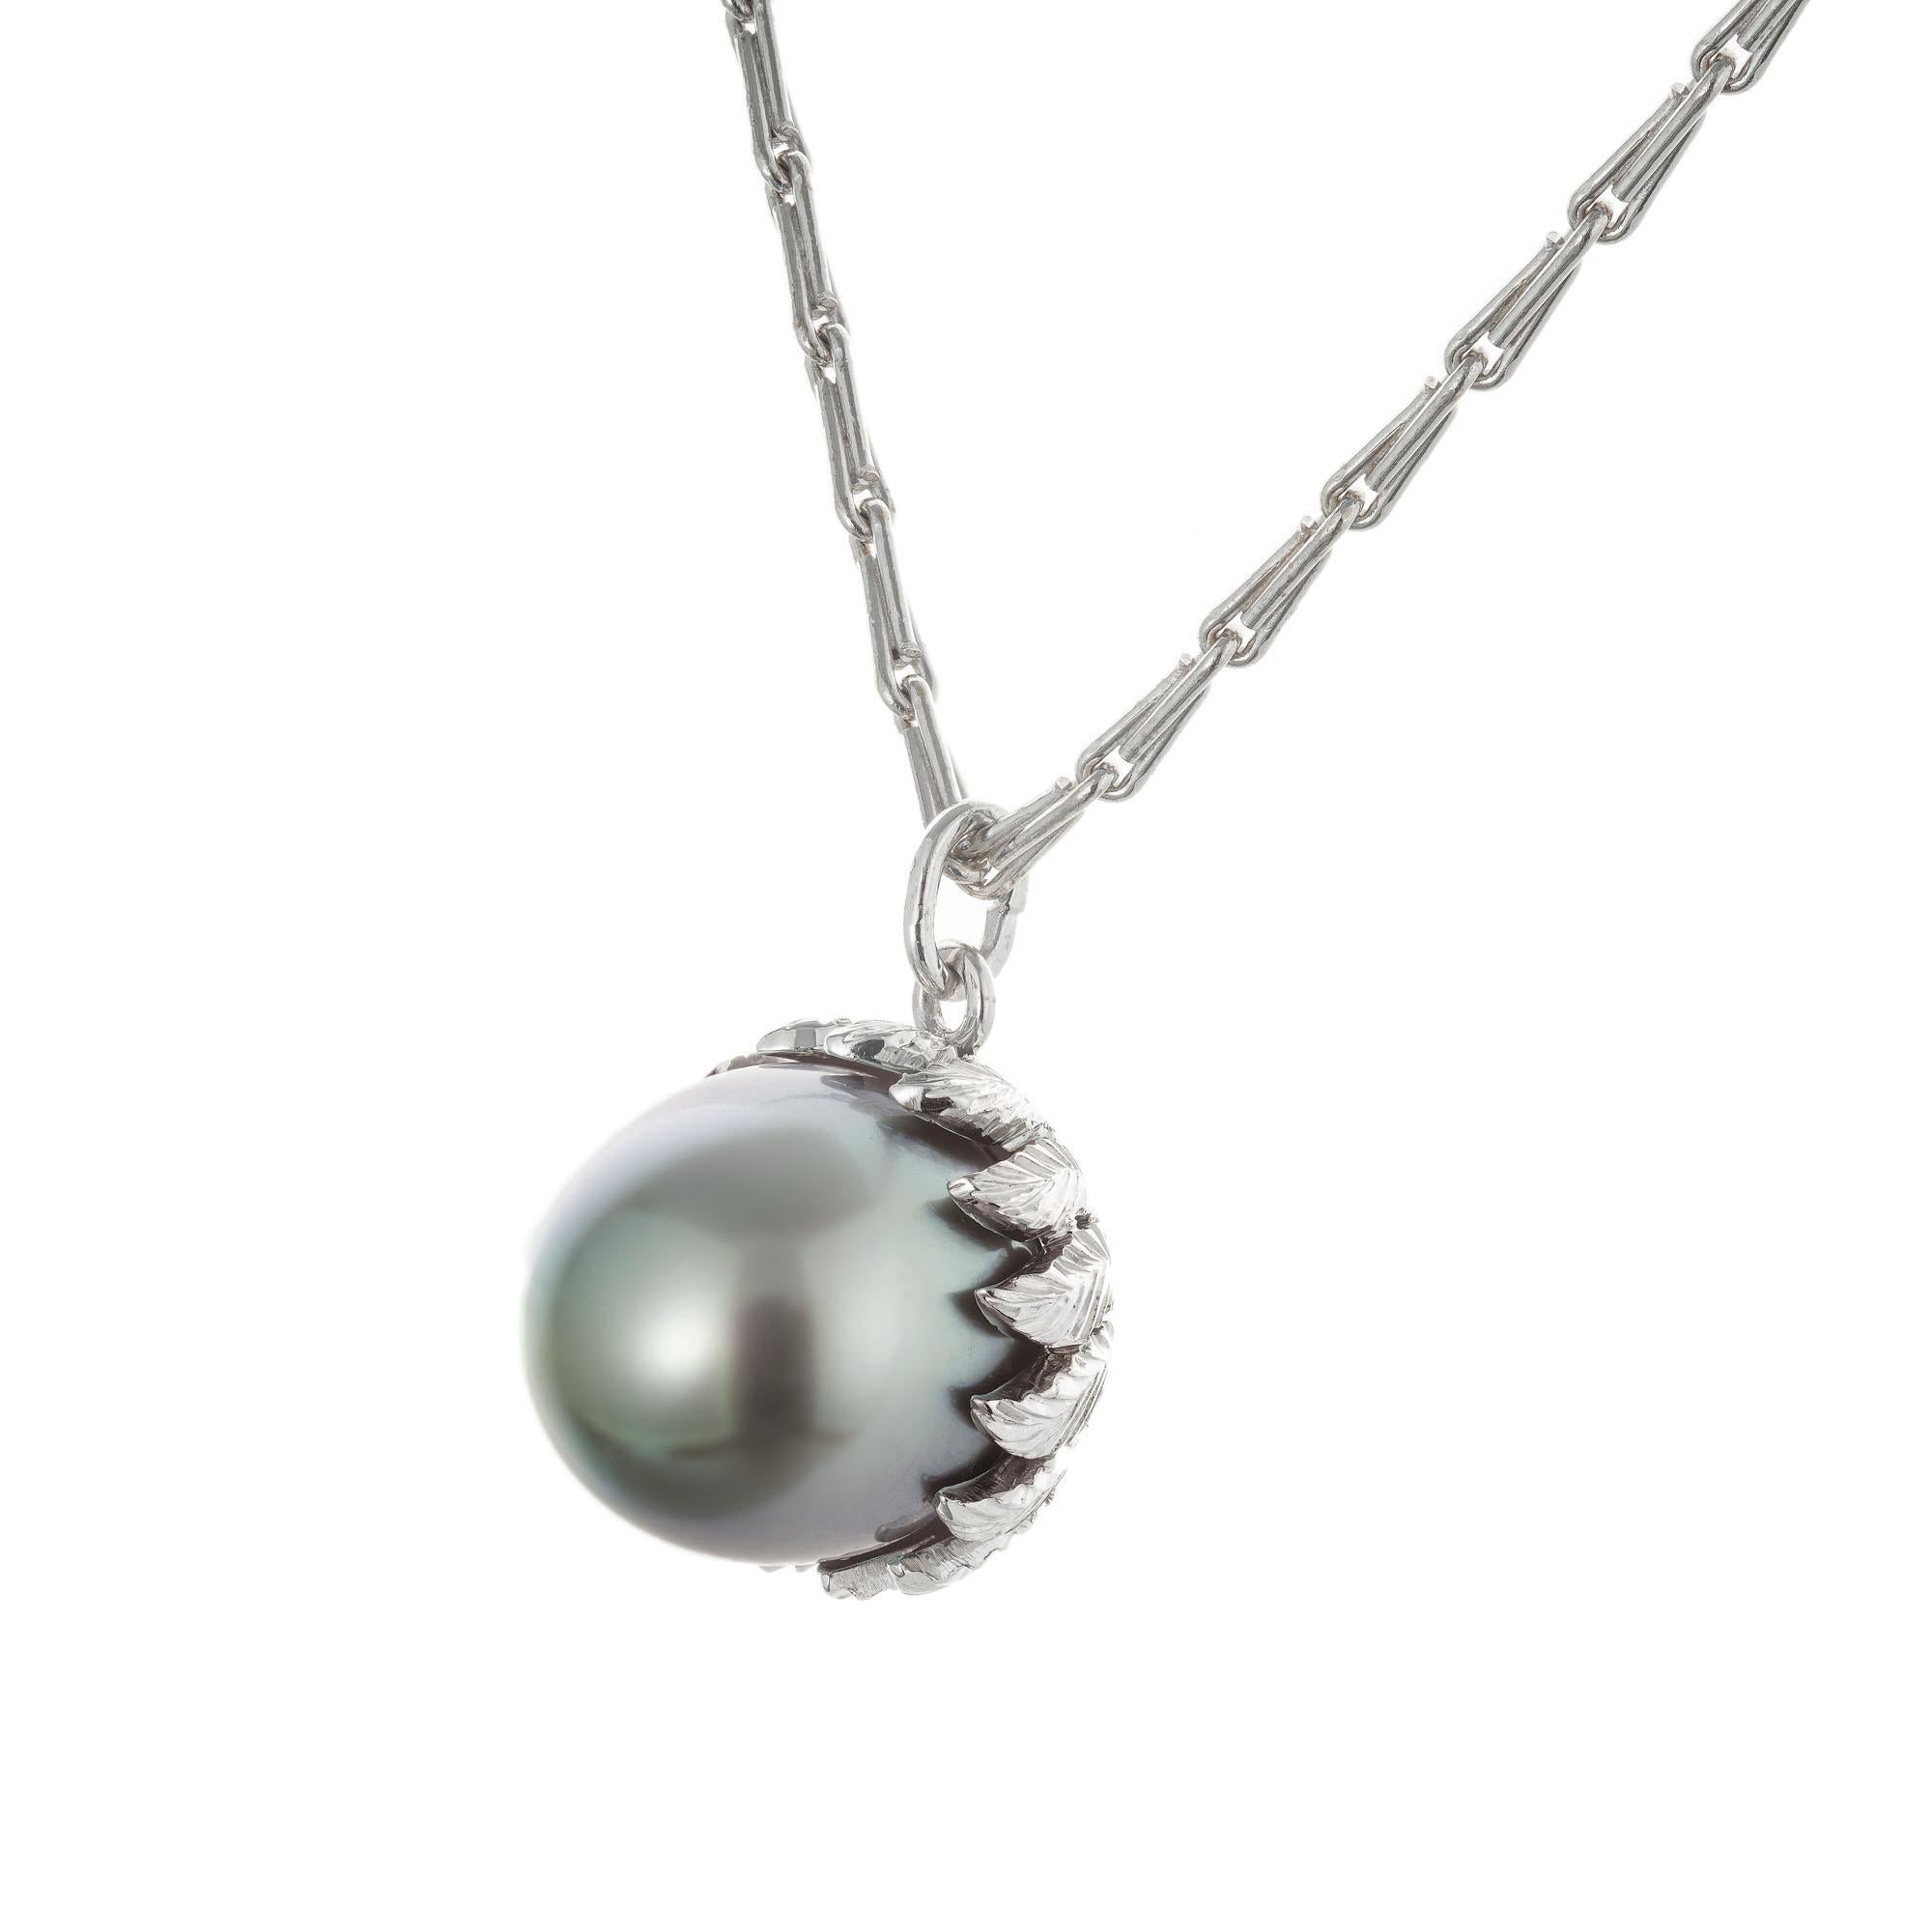 1960's Buccellati black south sea cultured pearl pendant in 18k white gold. Excellent lustre and nacre thickness. 18k white gold 18 inch chain marked 18k Italy. Pendant signed Buccellati

1 Italian Tahitian south sea cultured black pearl,